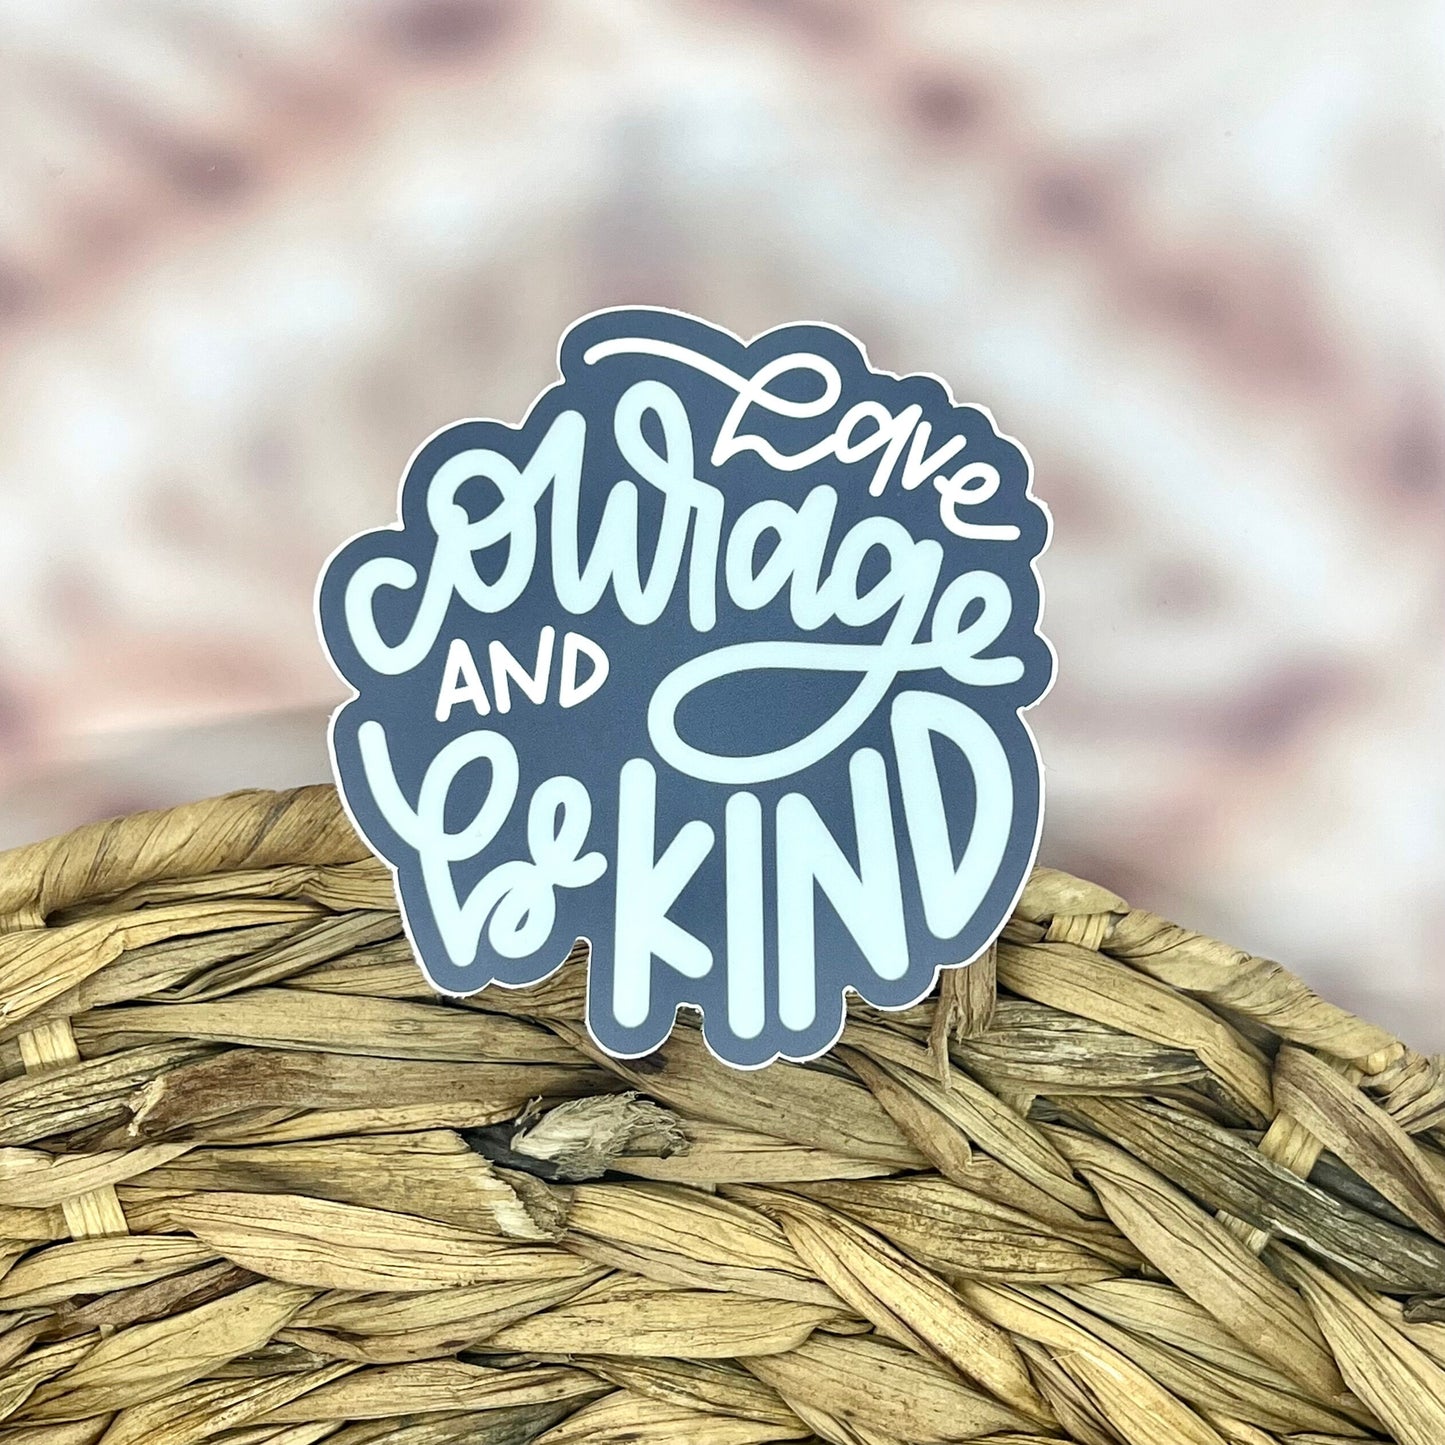 Have Courage and Be Kind Sticker. Weatherproof Vinyl Sticker. Aesthetic Positive Sticker for Car, Laptop, Water bottle.